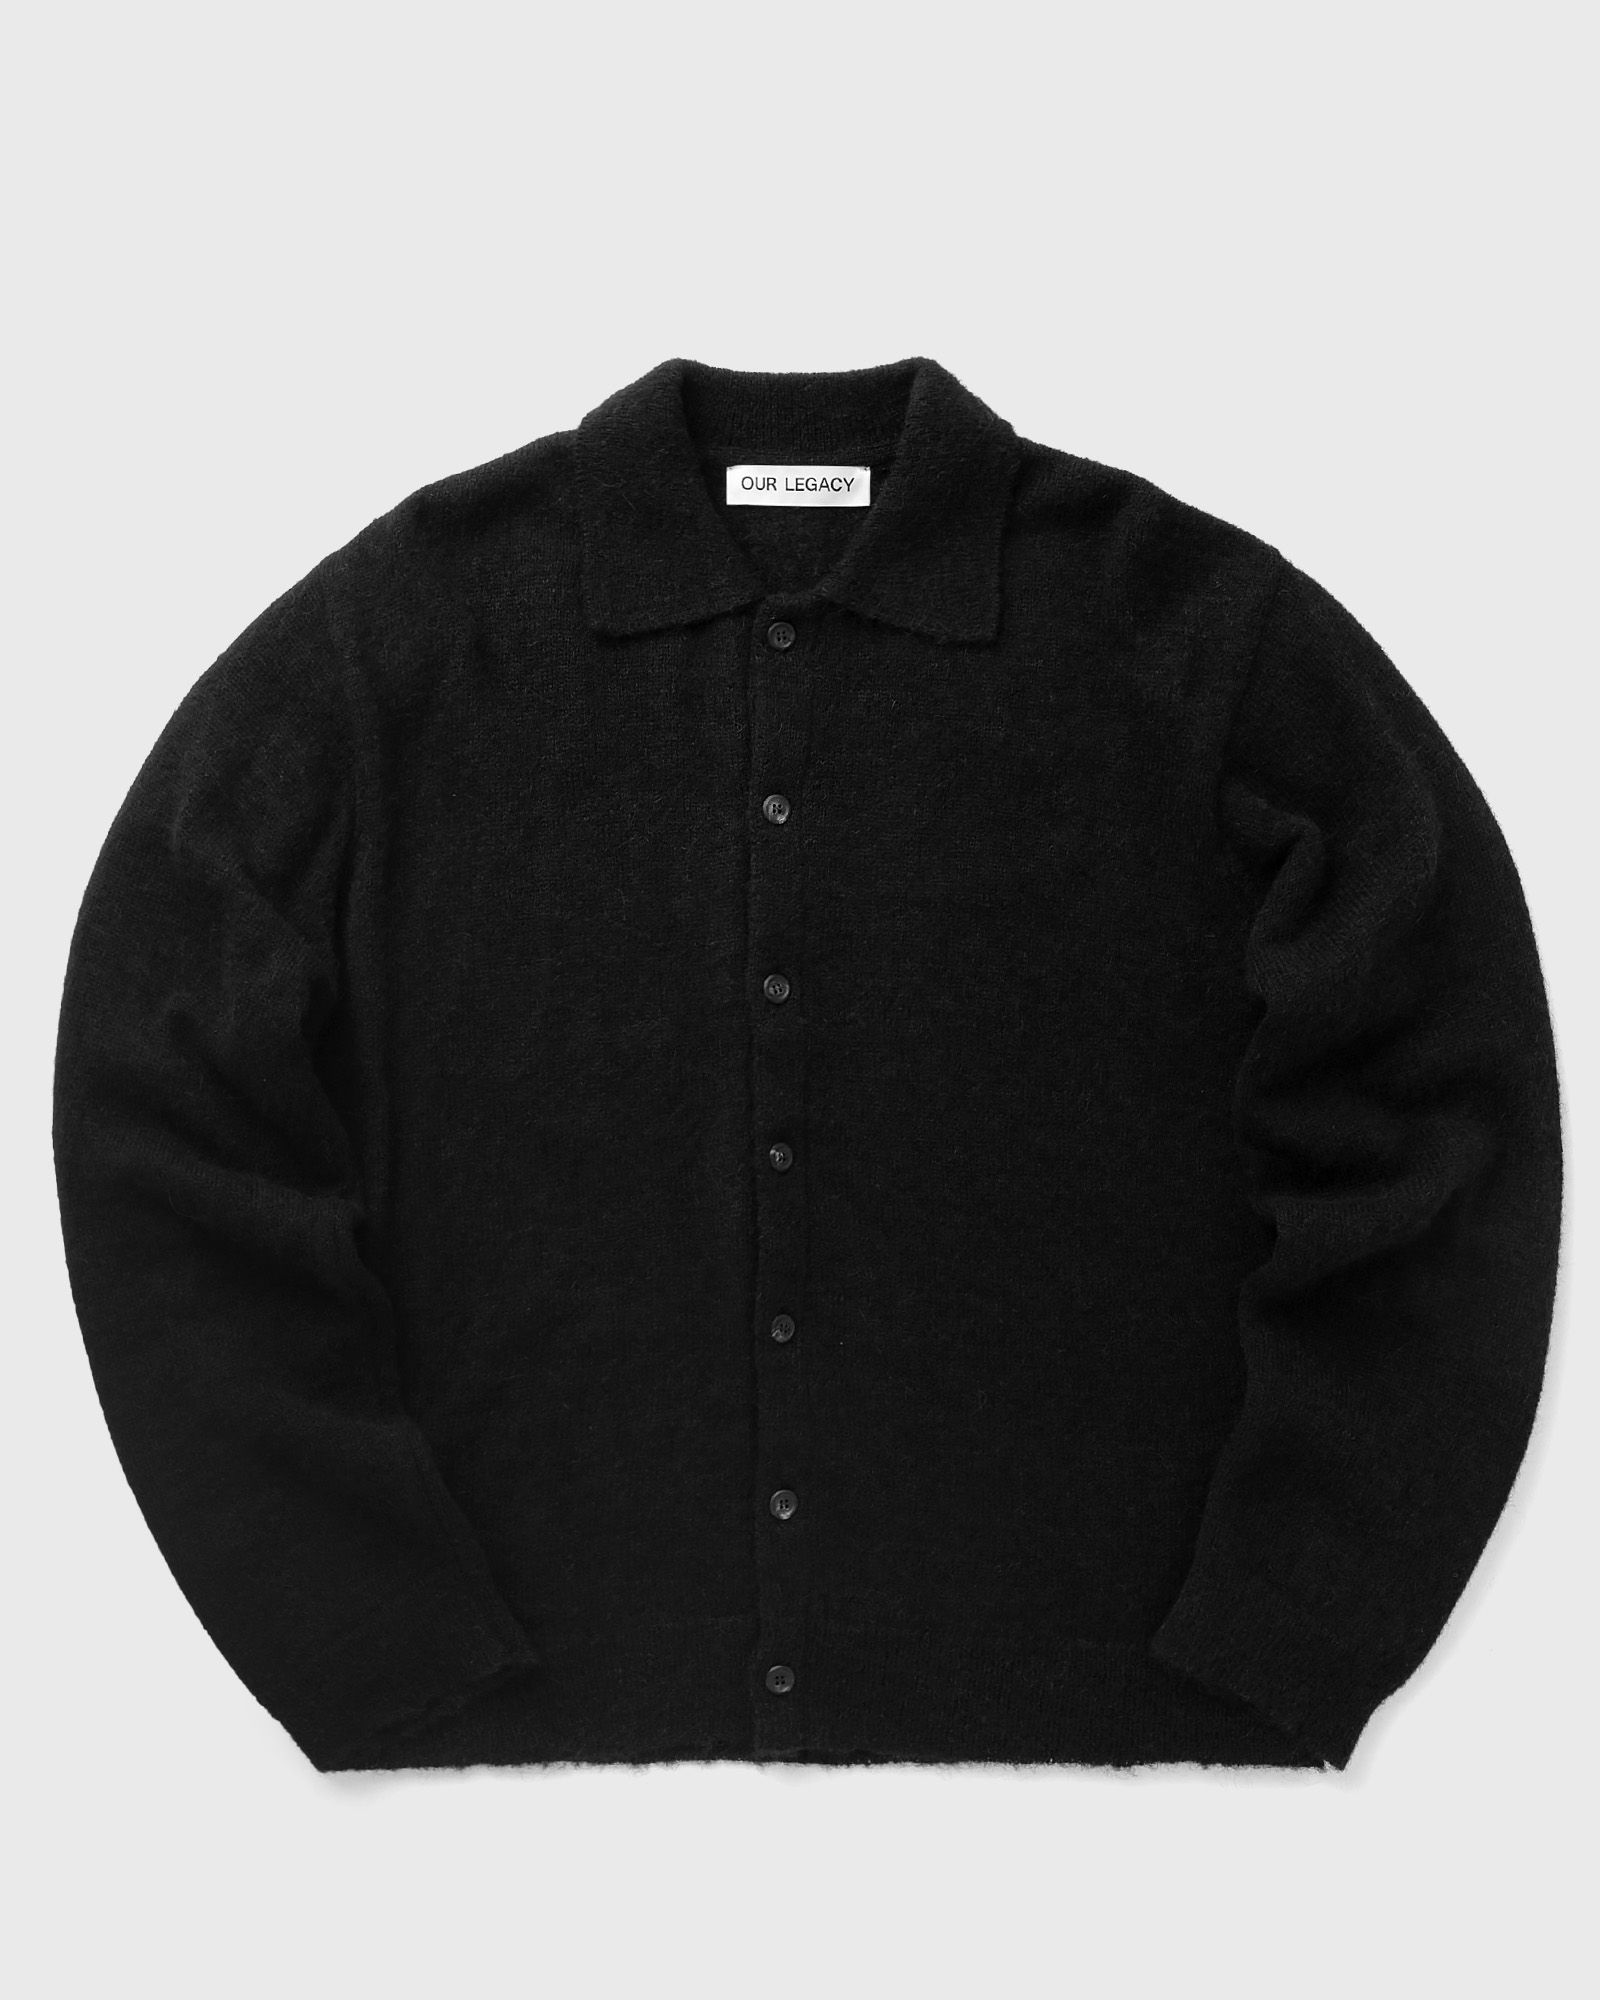 Our Legacy - evening polo men pullovers|zippers & cardigans black in größe:m